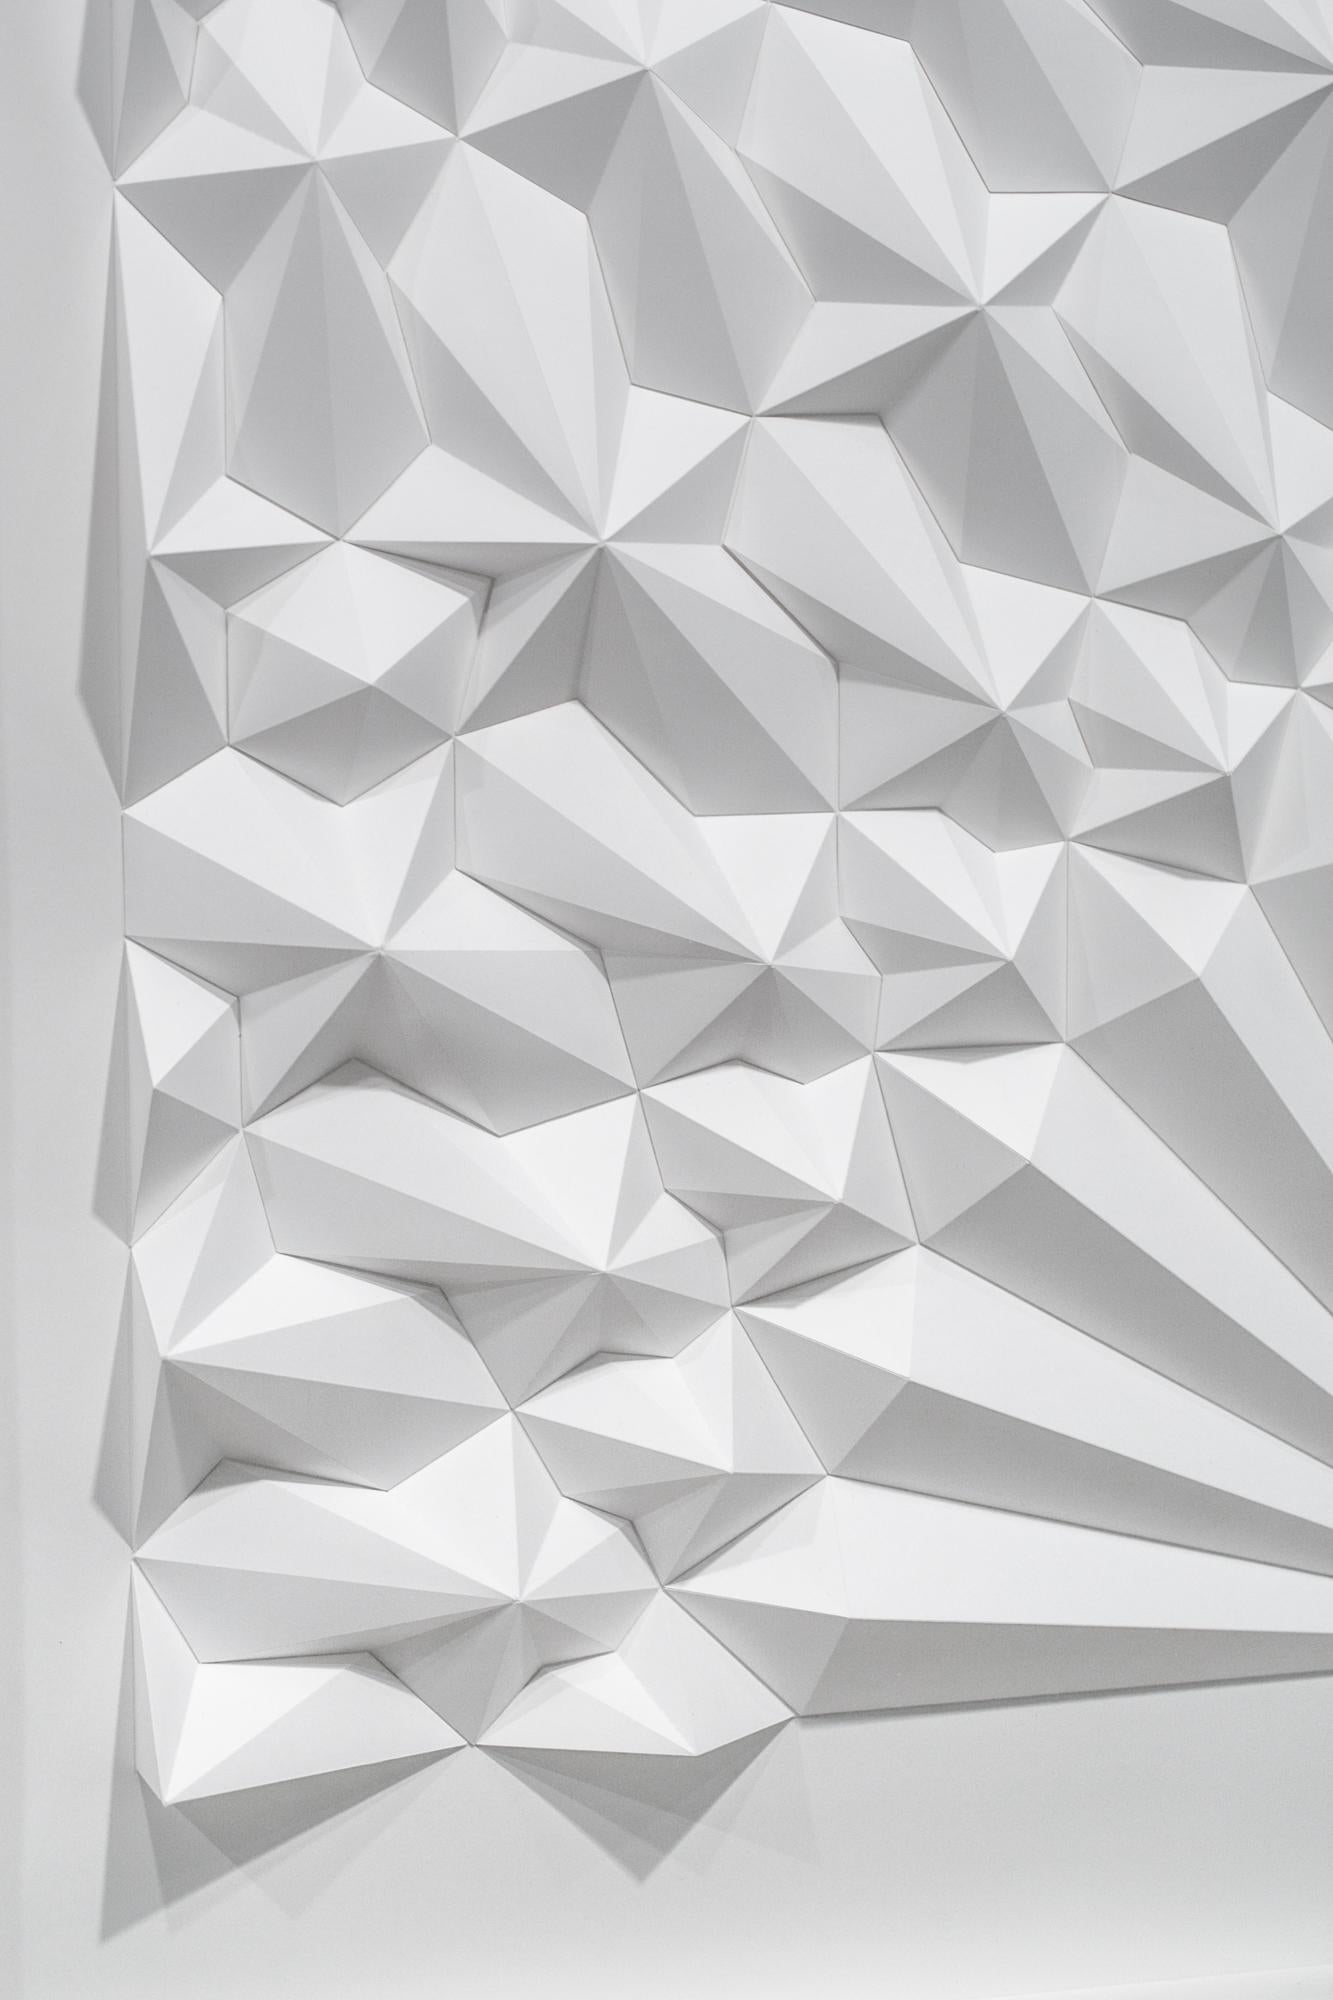 This white geometric, abstract, wall-hanging sculpture titled 